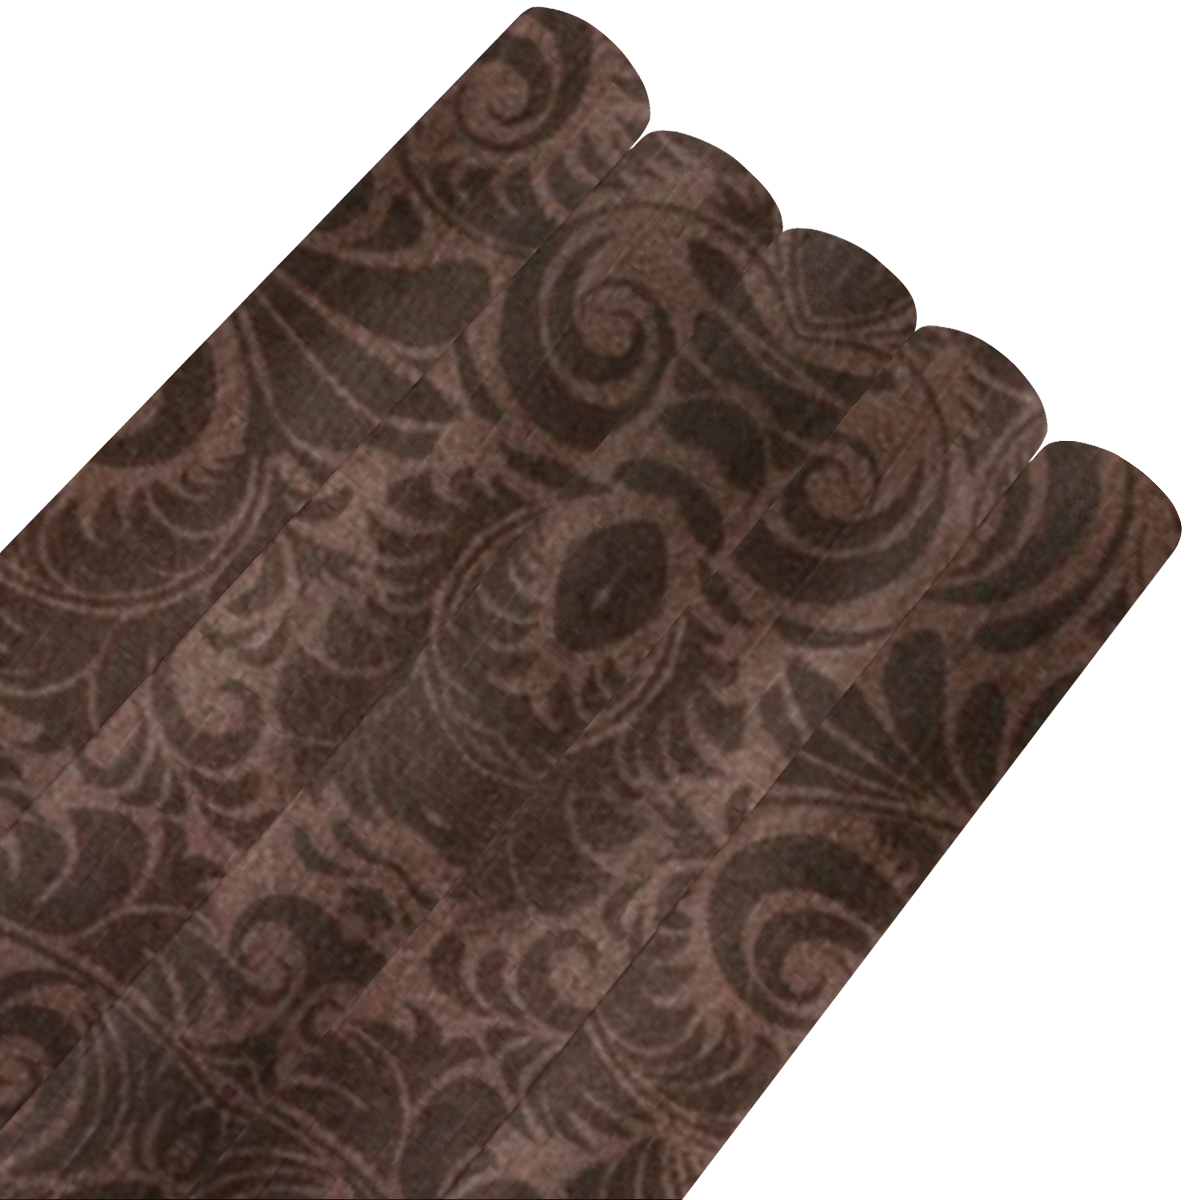 Denim with vintage floral pattern, rich brown Gift Wrapping Paper 58"x 23" (5 Rolls)